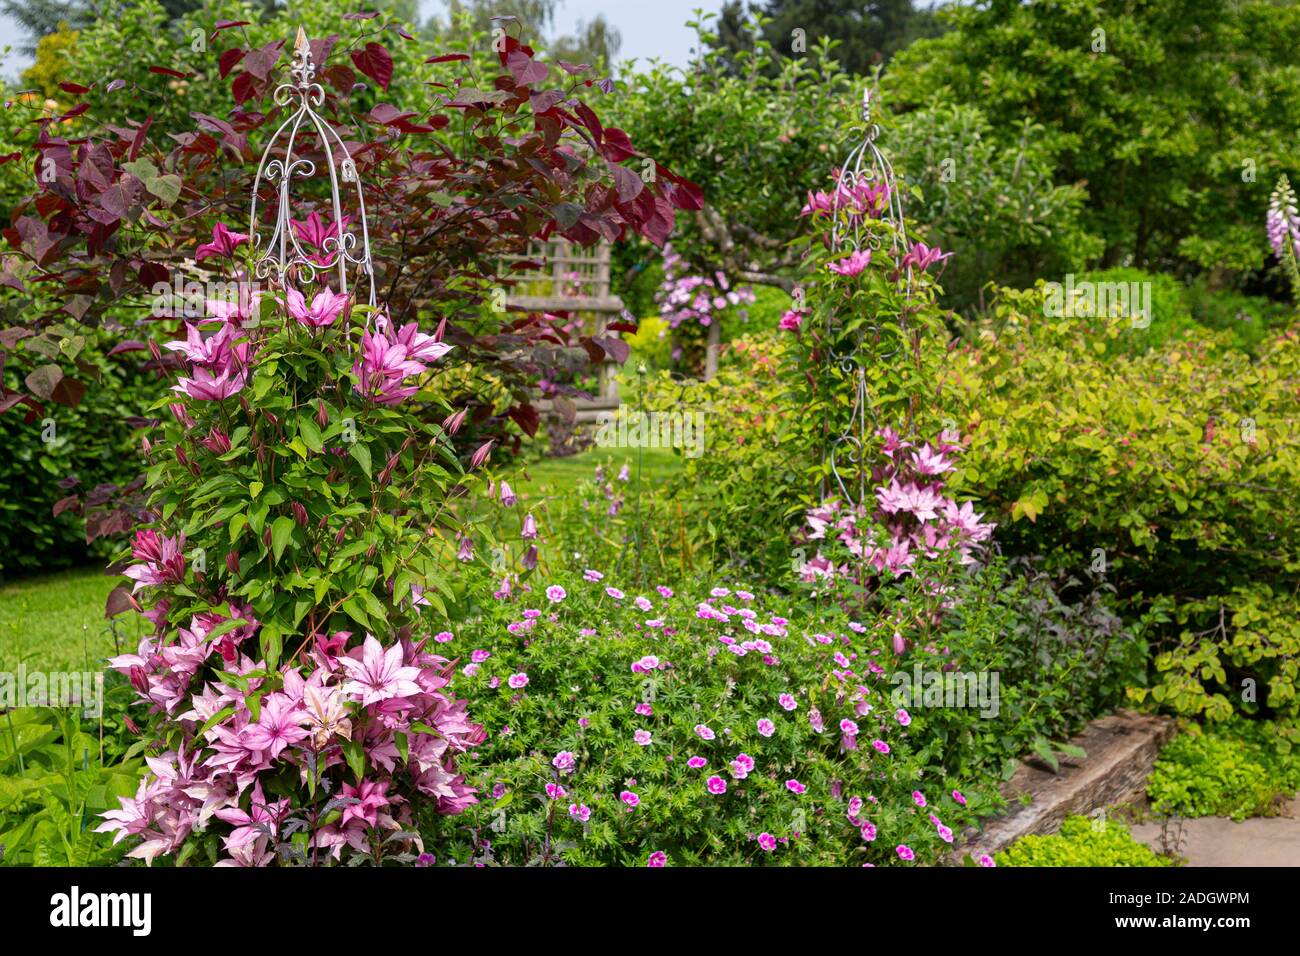 Herbaceous border with Clematis 'Giselle' and Geranium sanguineum 'Elke' Stock Photo